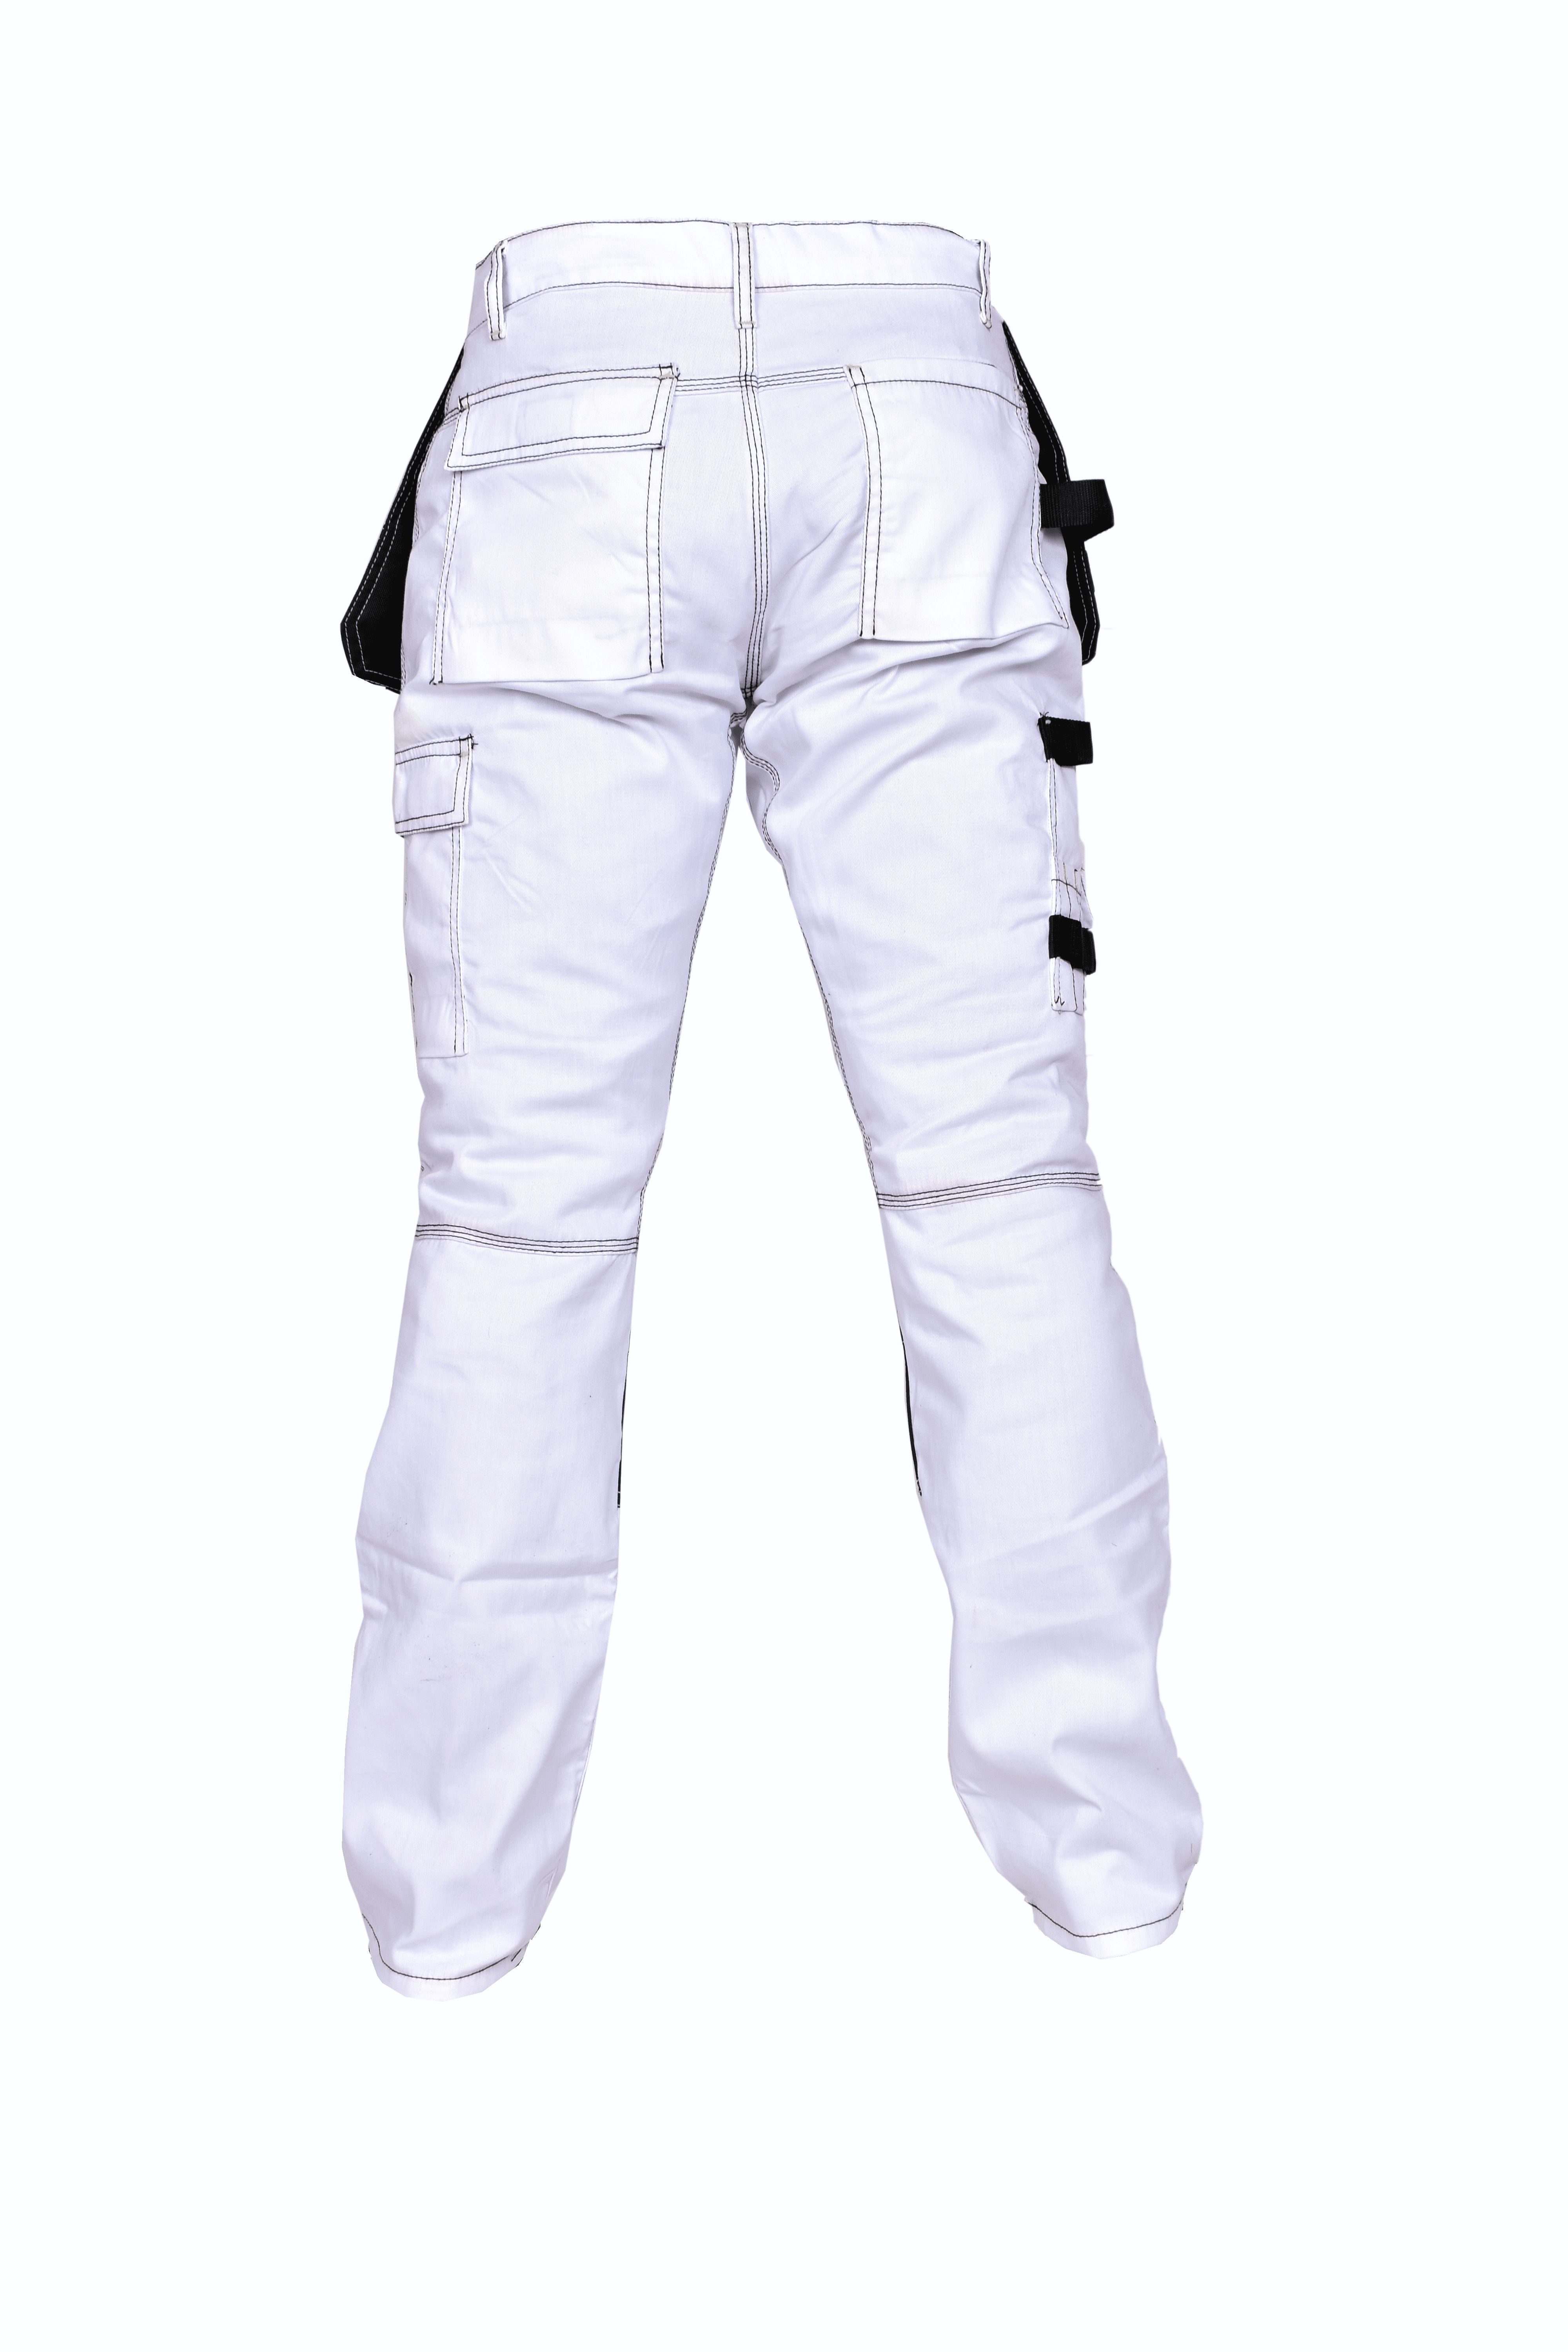 Mens Construction Cordura Pants Carpenter Utility Tool Pockets Heavy Duty  Knee Reinforced Work Wear Safety Trousers 